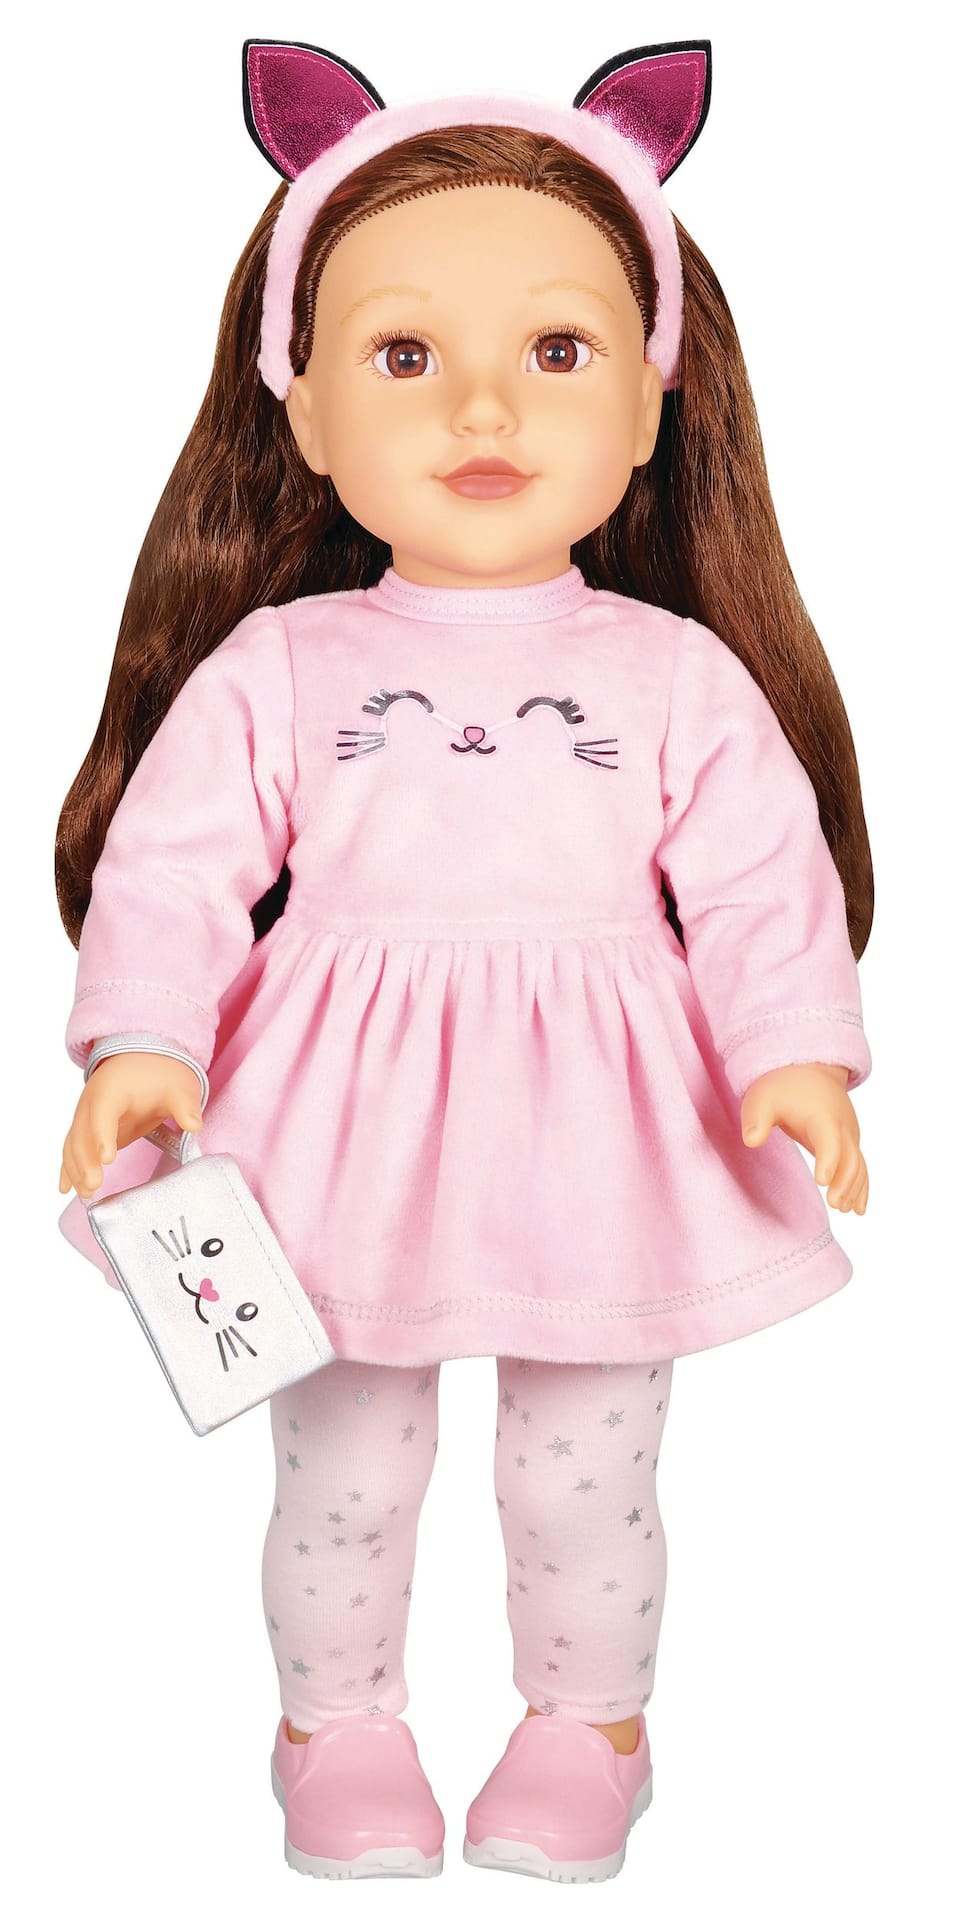 Doll Clothes - 6 Dress Outfits Bundle fits Clothing Sets Fits American Girl  Doll, My Life Doll and other 18 inch Dolls 